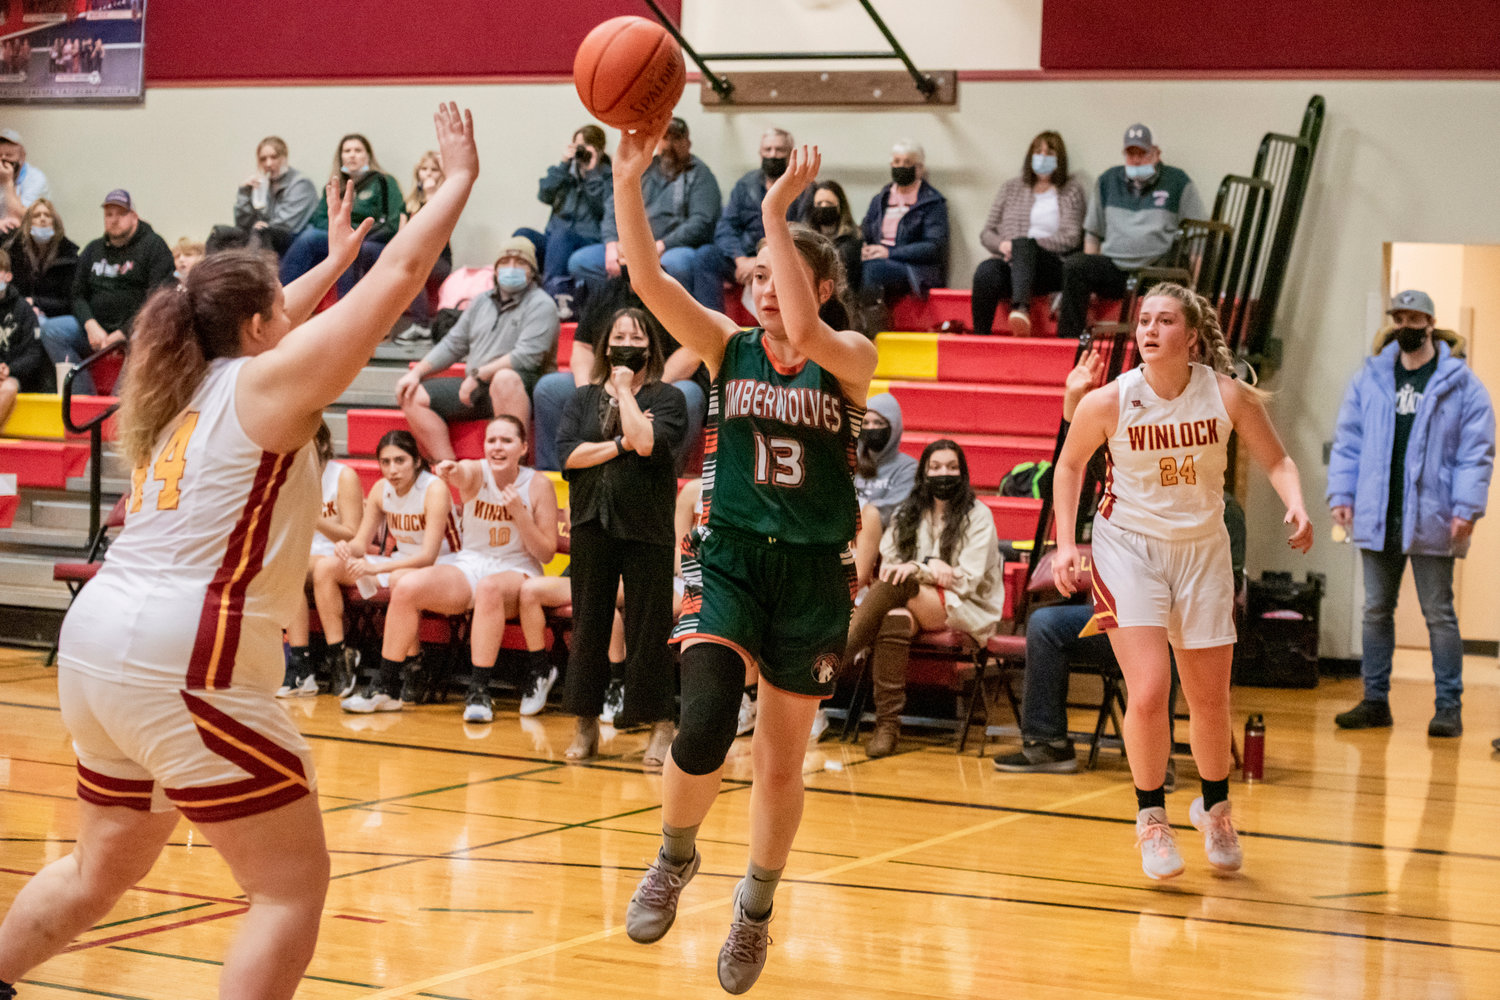 MWP’s Kaliya Sams (13) looks to pass during a game against Winlock.